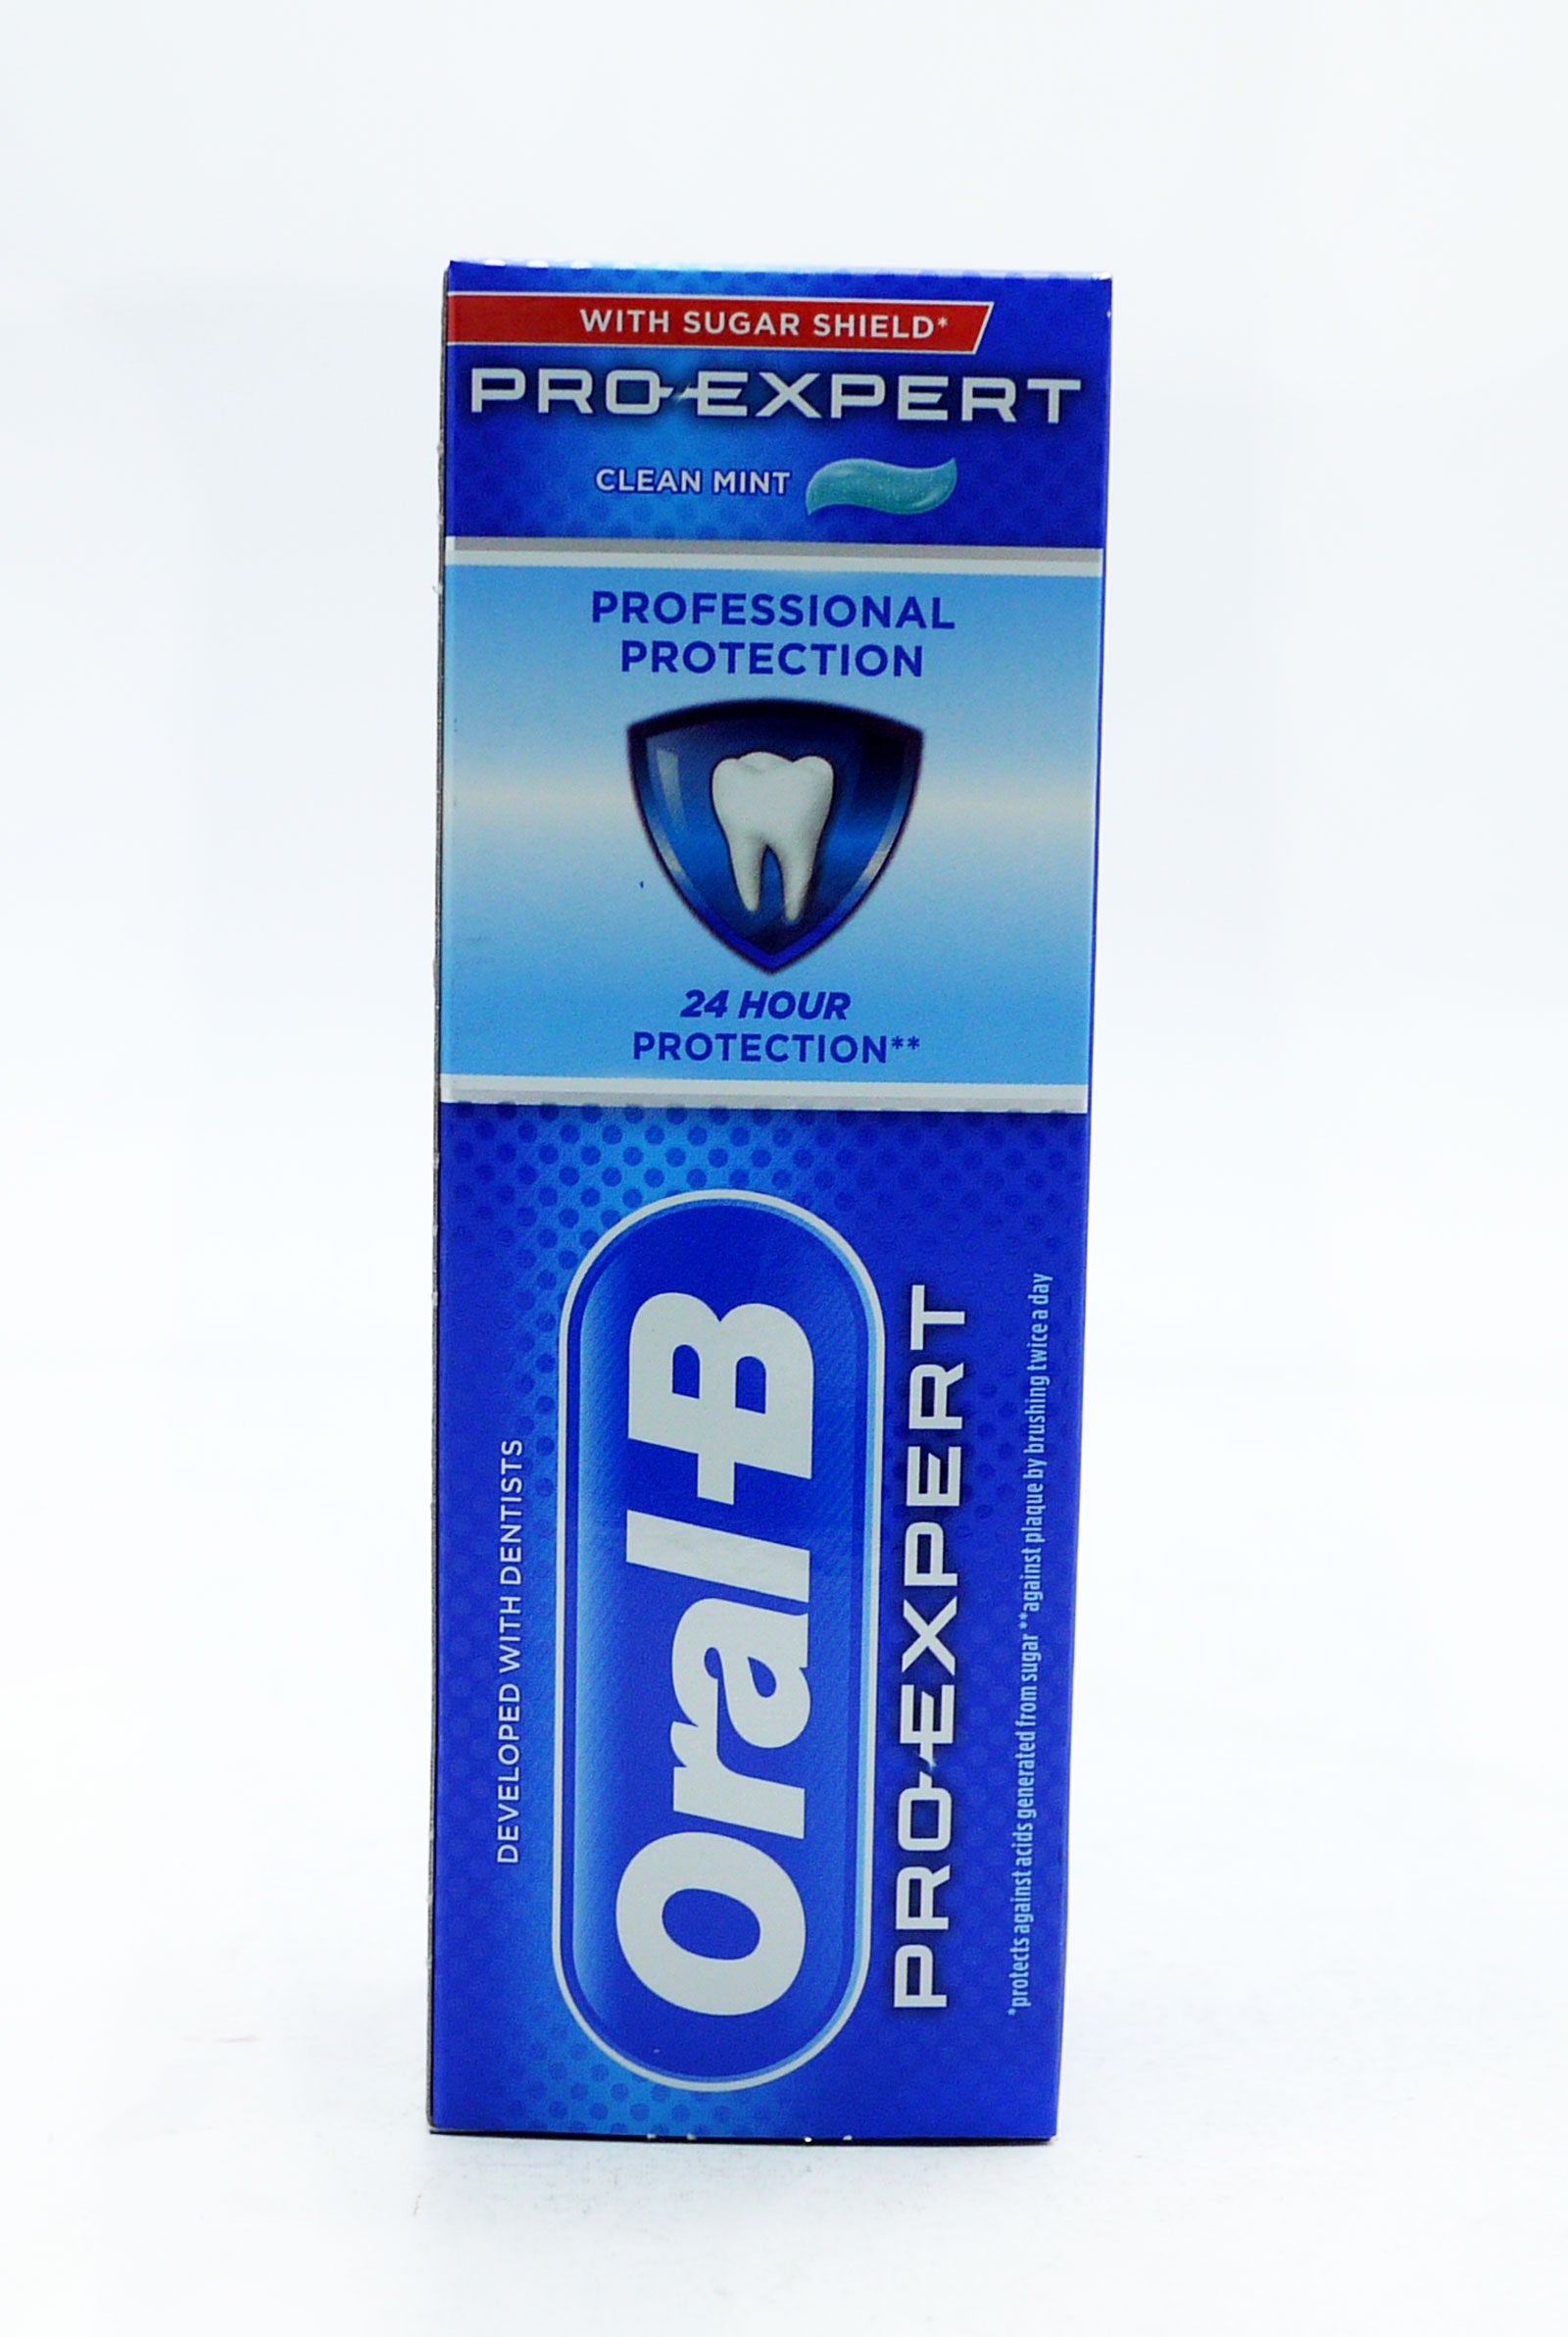 Oral B Toothpaste Pro-Expert Professional Protection Clean Mint50ml*